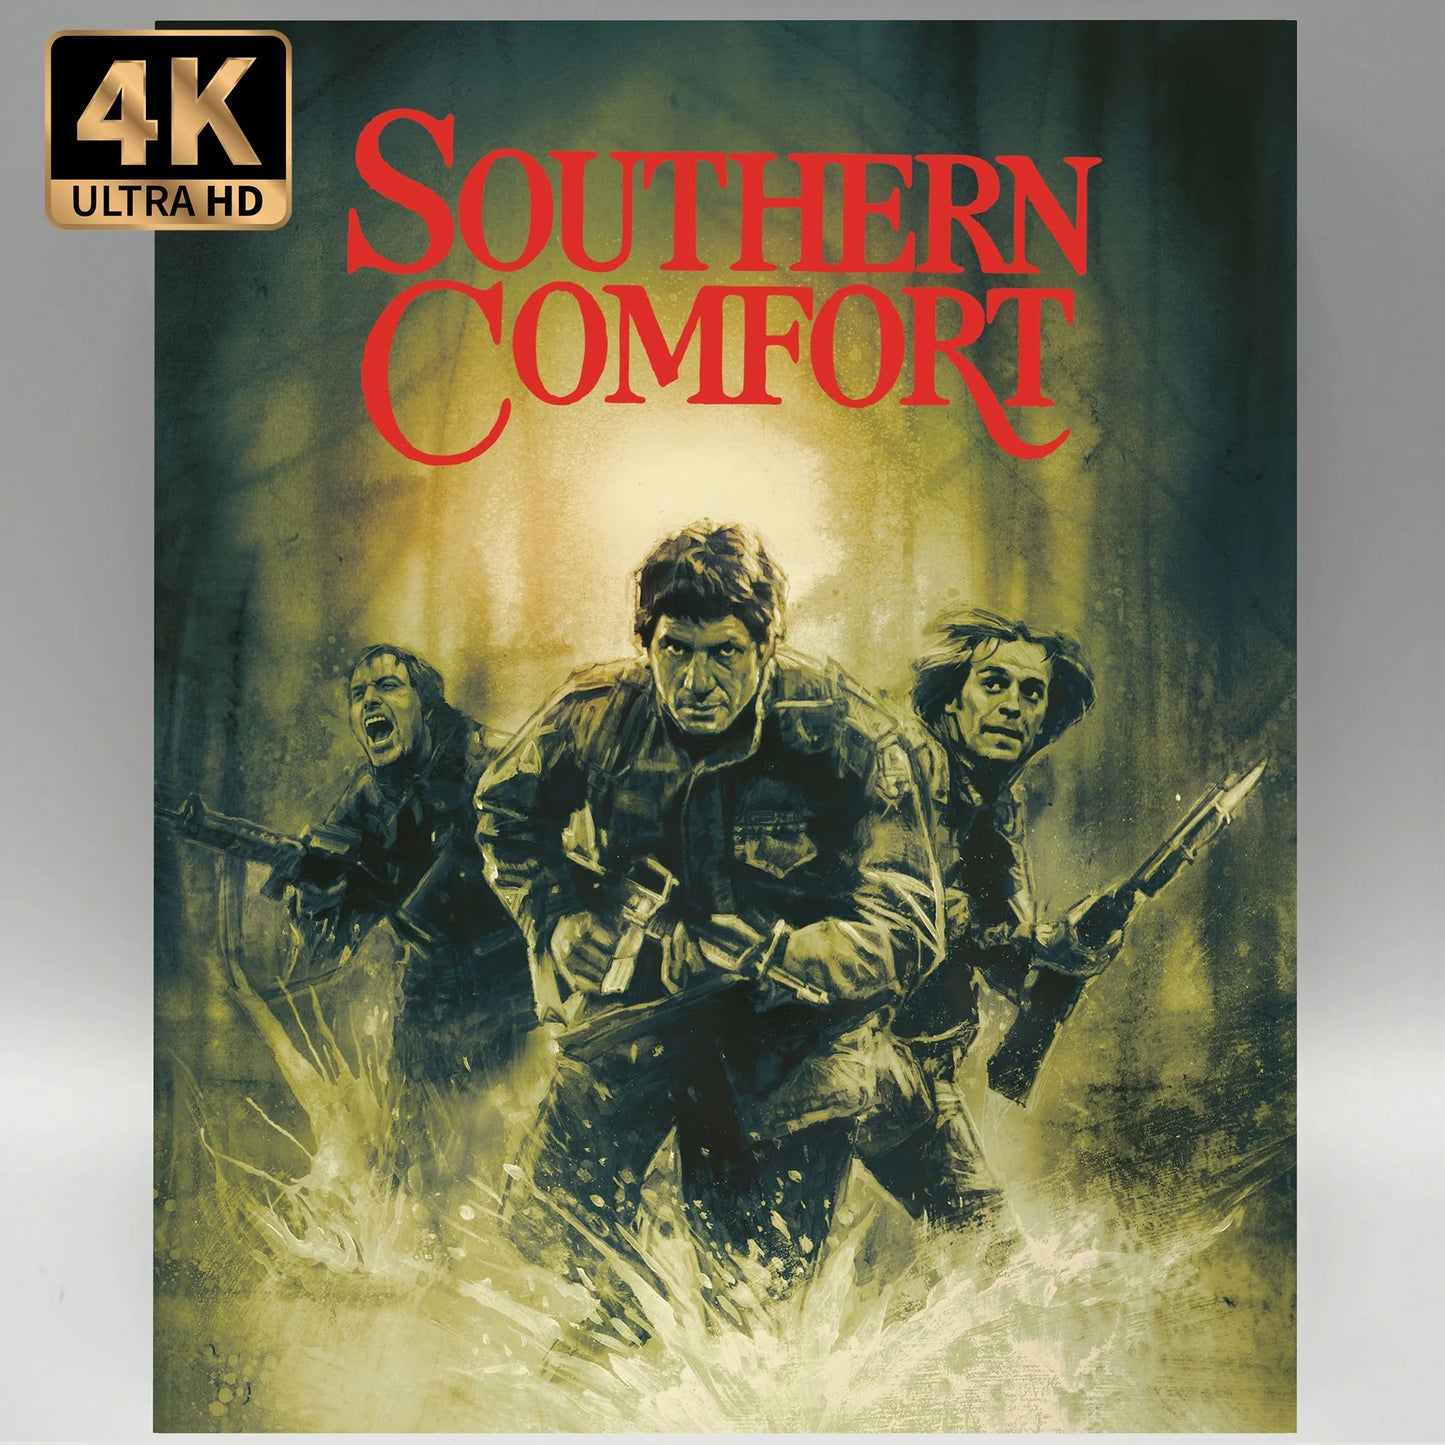 Southern Comfort 4K UHD + Blu-ray Limited Edition Deluxe Magnet Box + Slipcover set (Vinegar Syndrome)